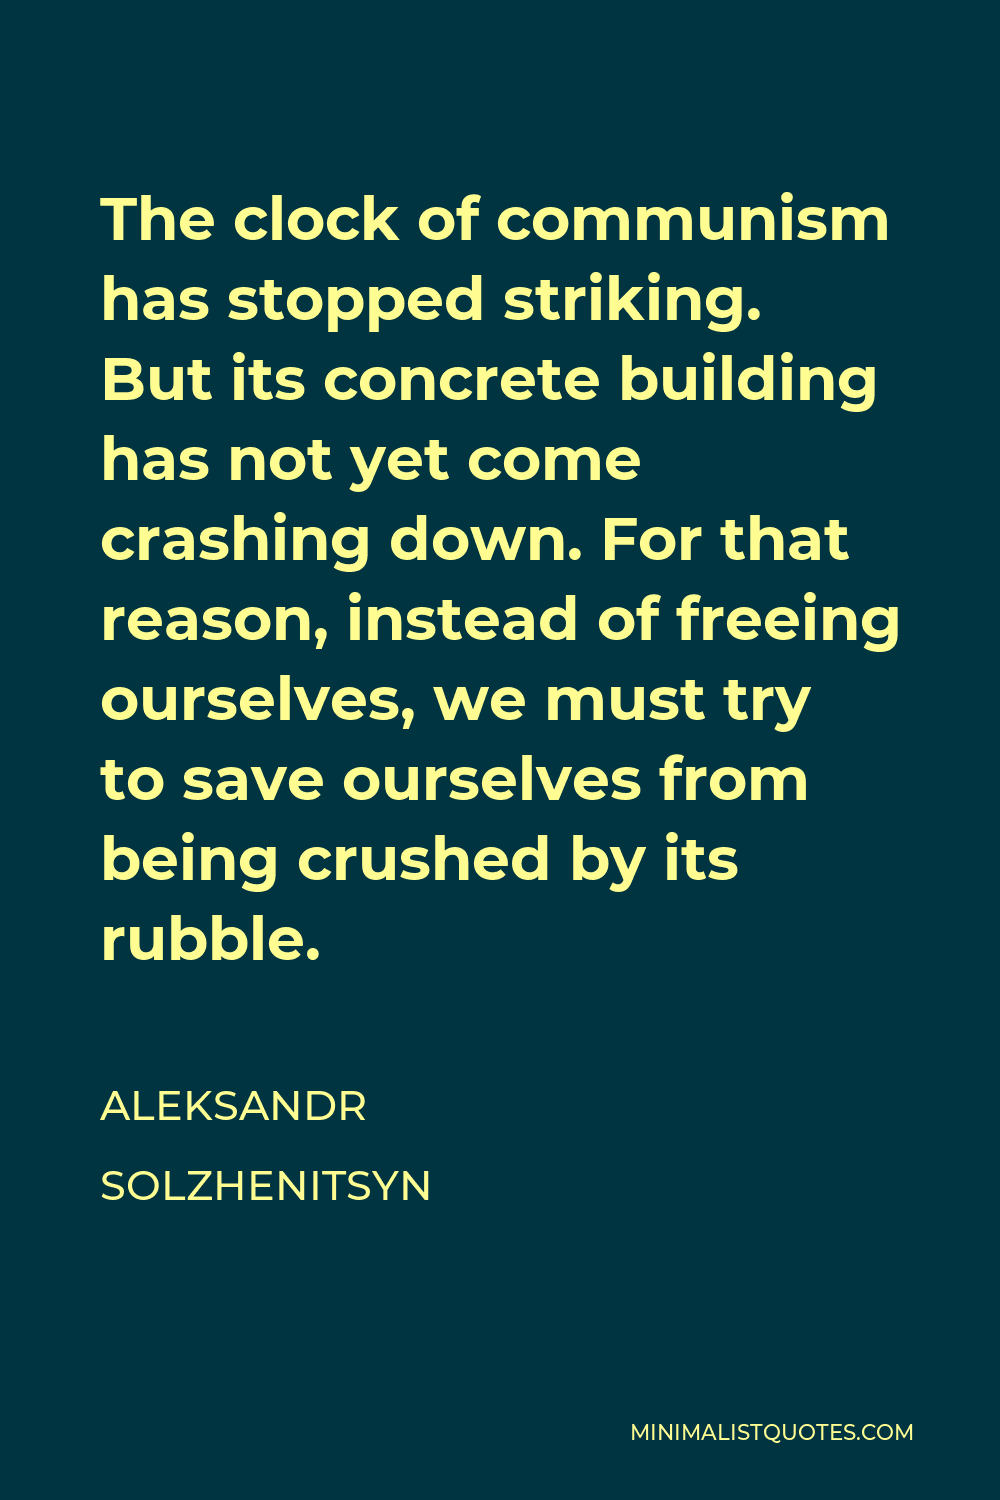 Aleksandr Solzhenitsyn Quote - The clock of communism has stopped striking. But its concrete building has not yet come crashing down. For that reason, instead of freeing ourselves, we must try to save ourselves from being crushed by its rubble.